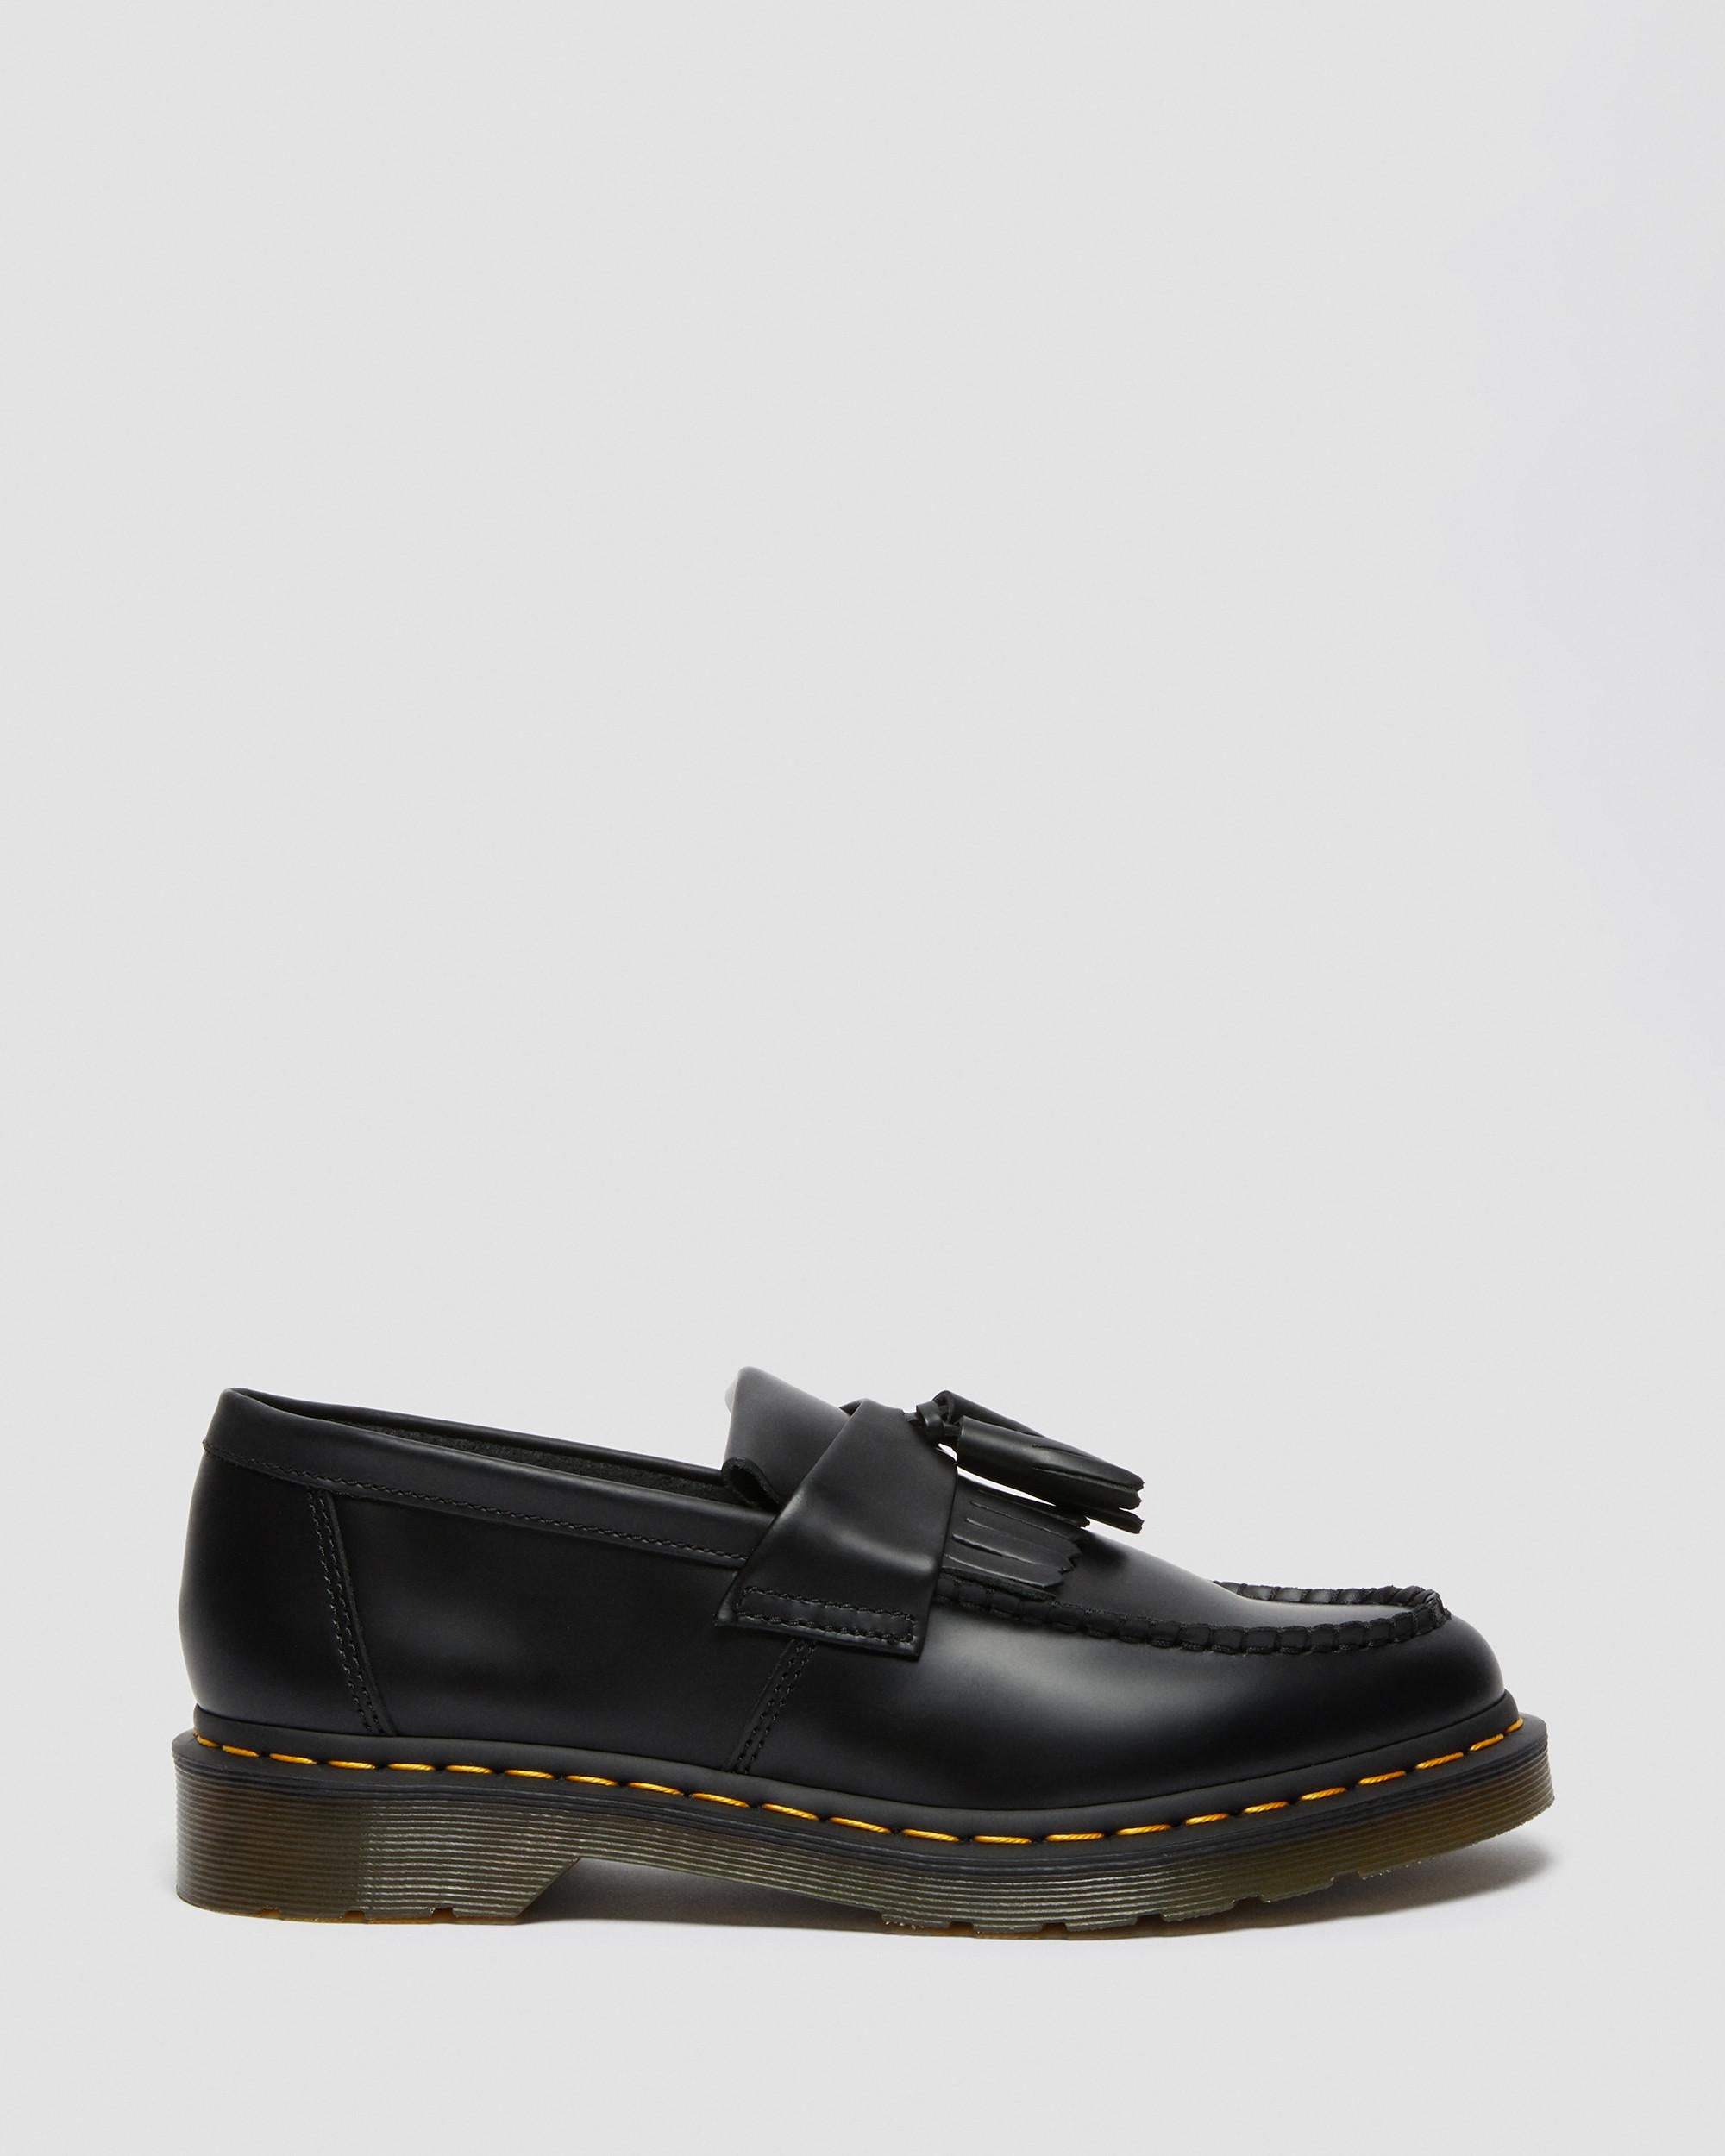 Adrian Yellow Stitch Smooth Leather Shoes